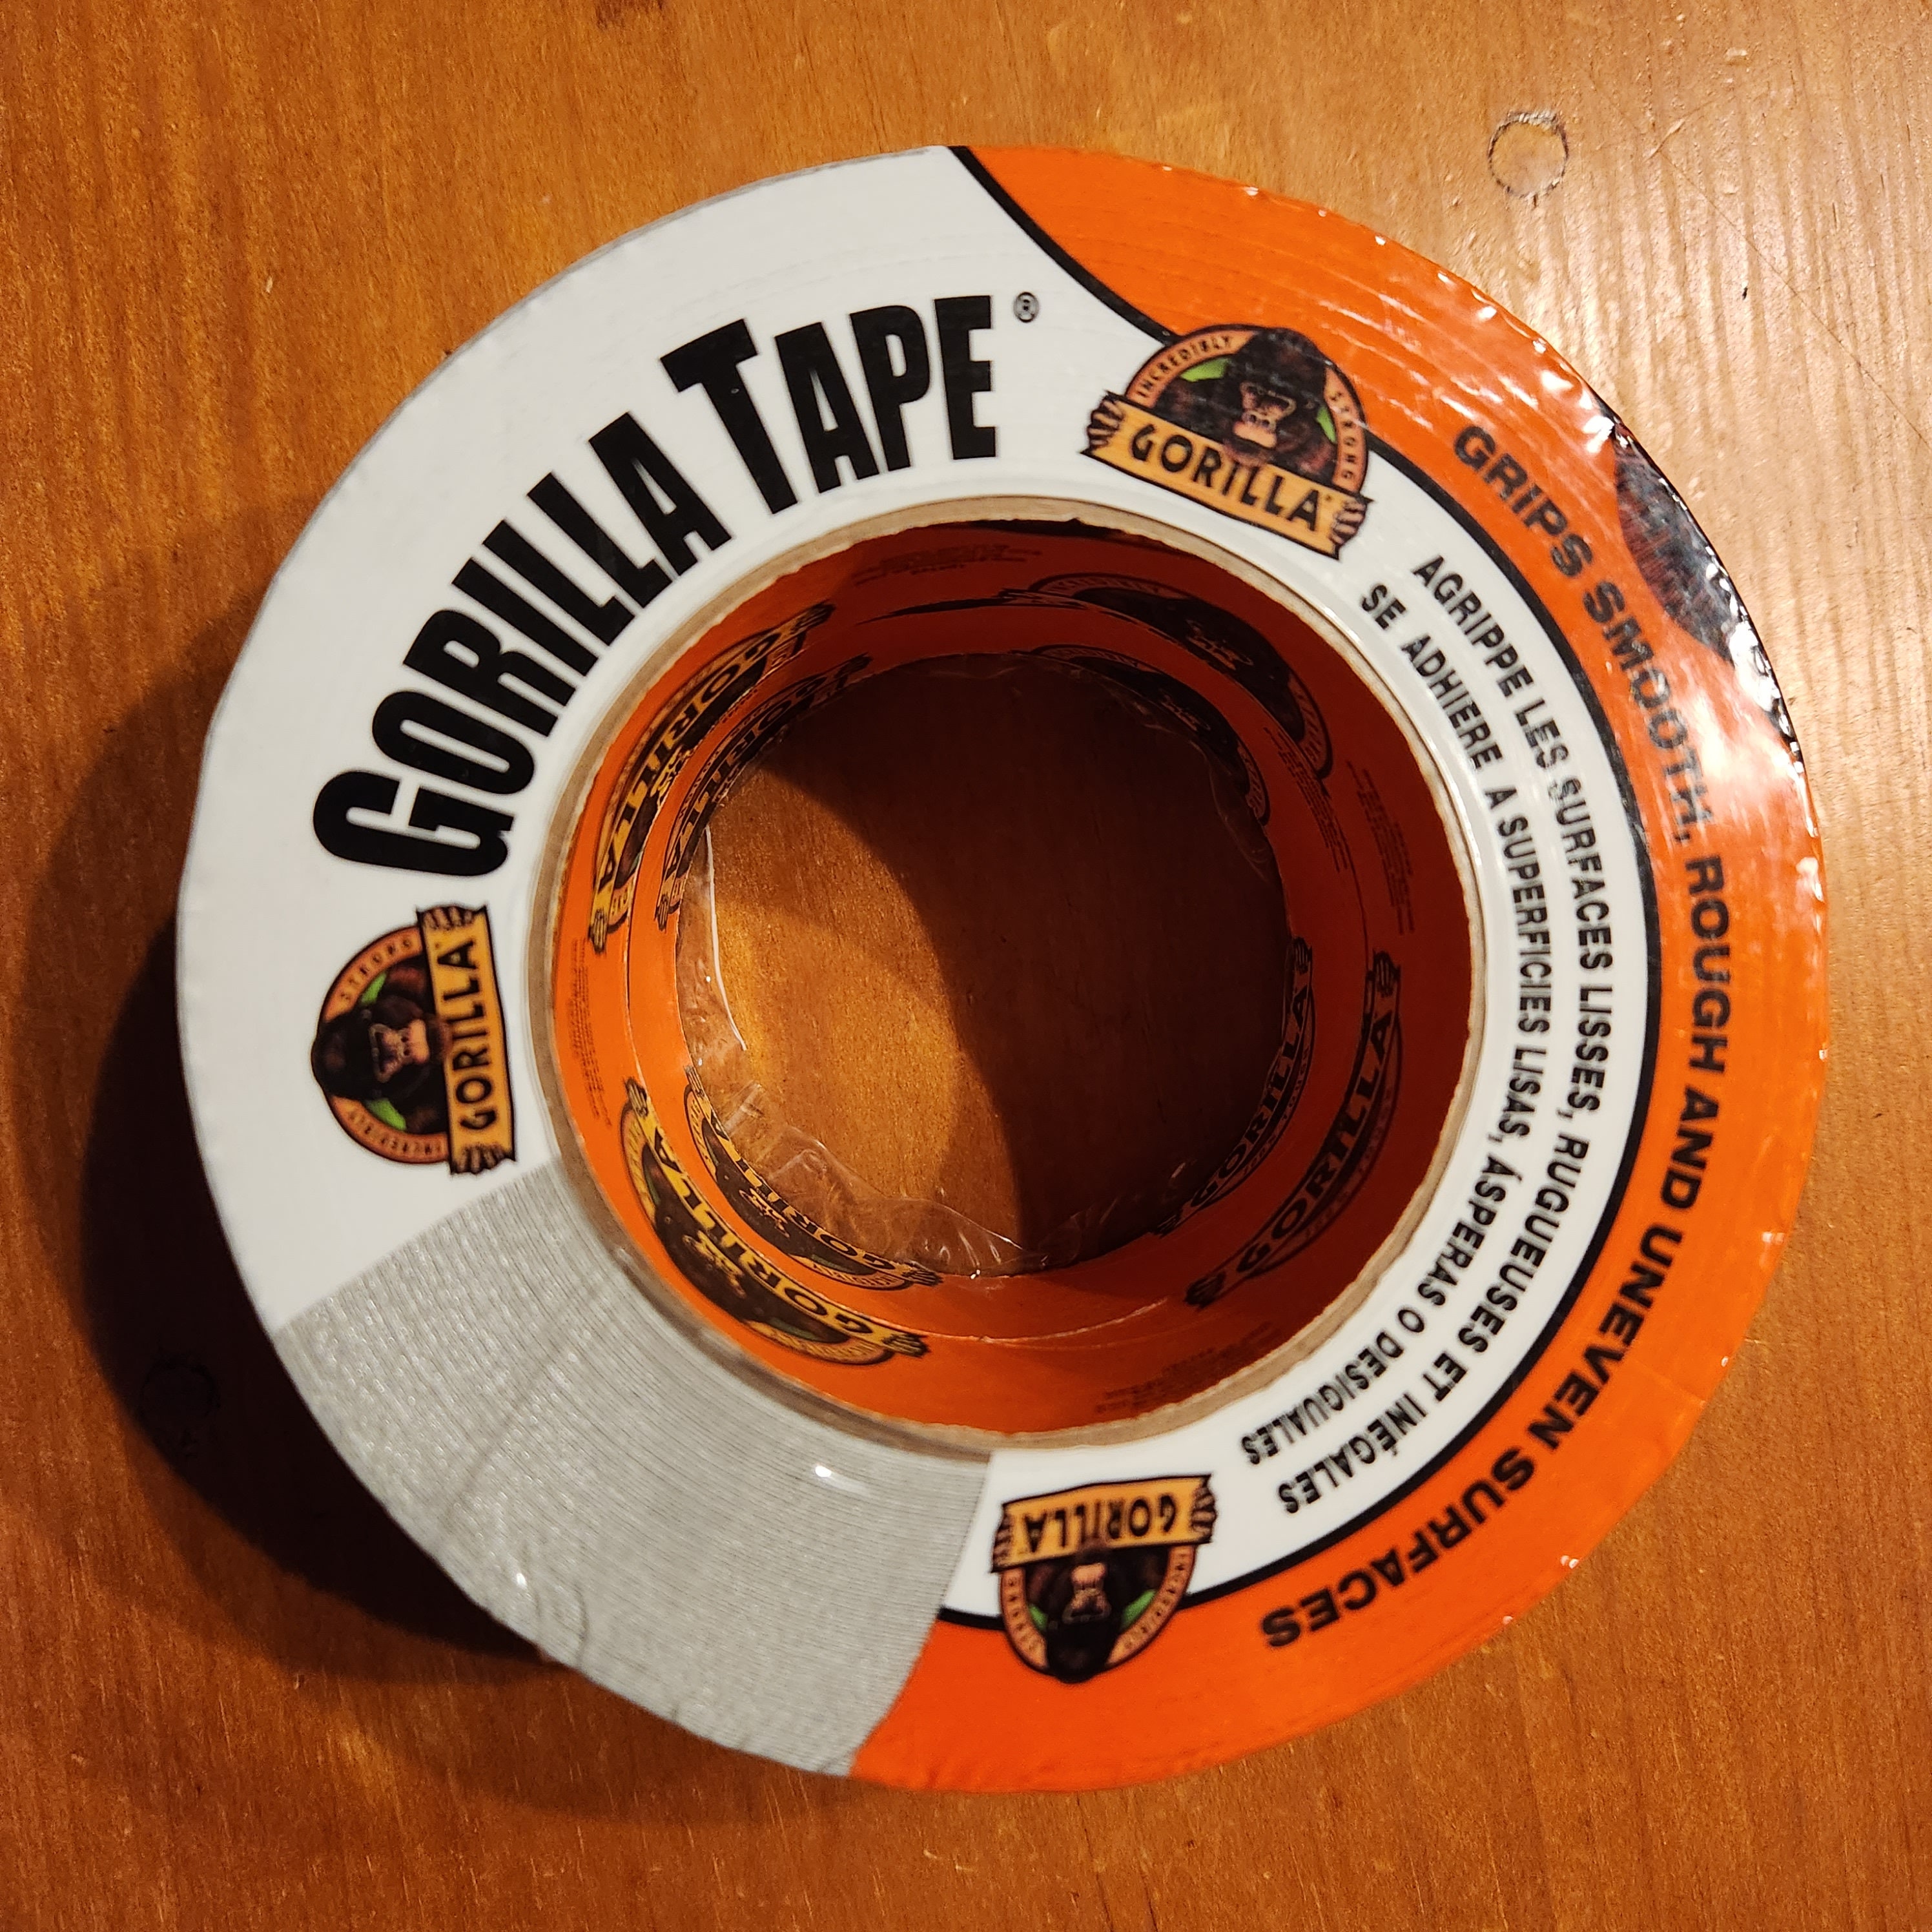 Gorilla Tape/white/blanc/blanca/2.8in by 25 Yards/new Un Opened Rolls/grips  Smooth Rough and Uneven Surfaces/made in the USA -  Denmark